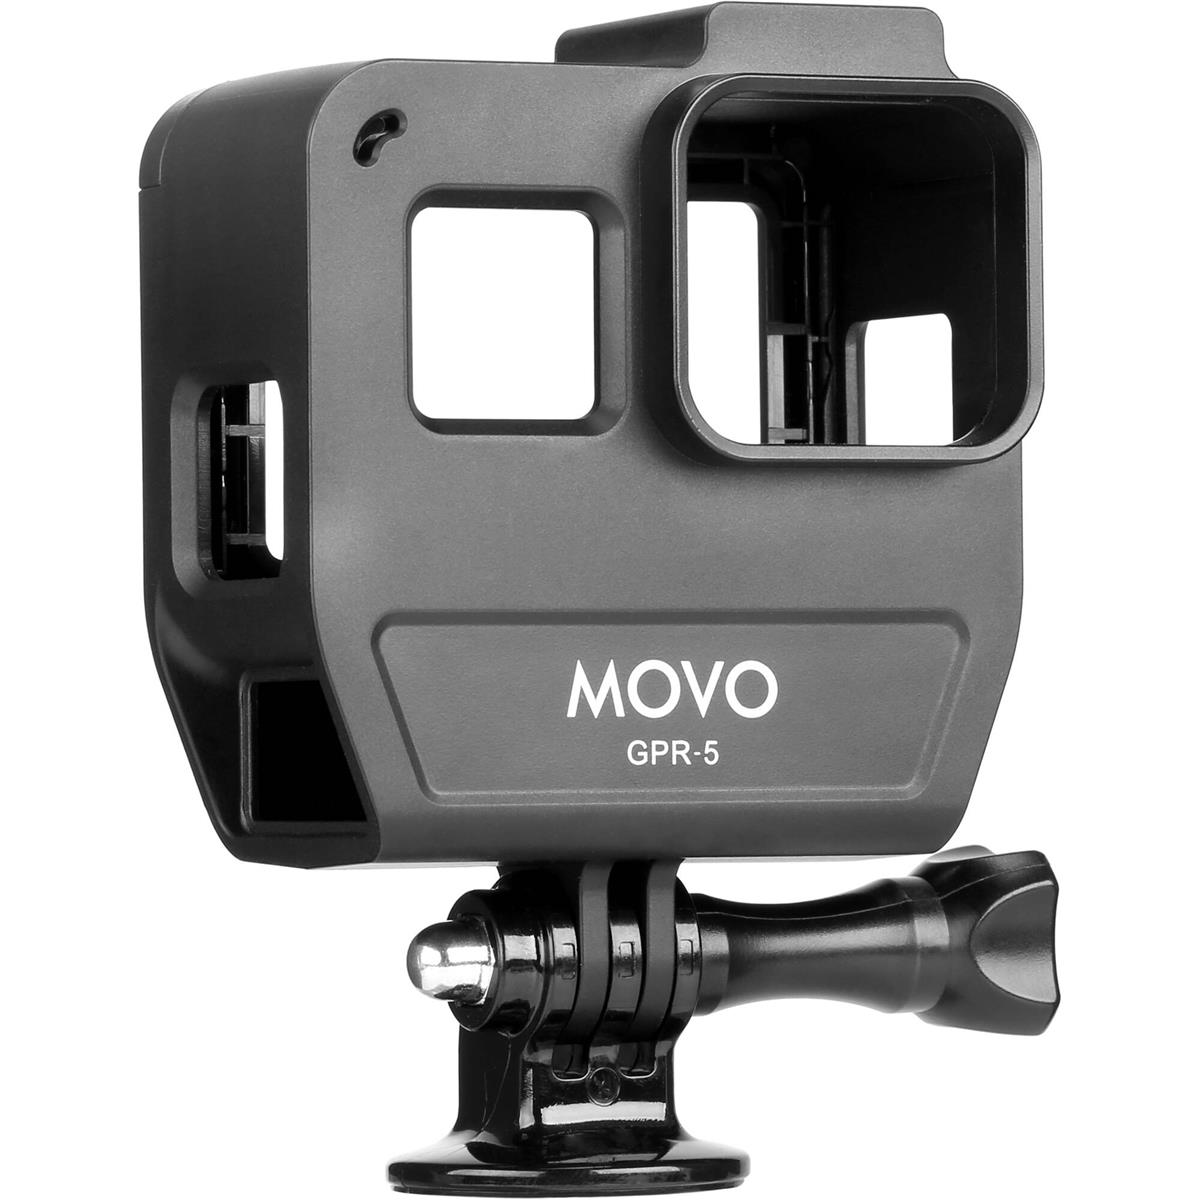 Image of Movo Photo GPR-5 Media Housing Case for GoPro Camera